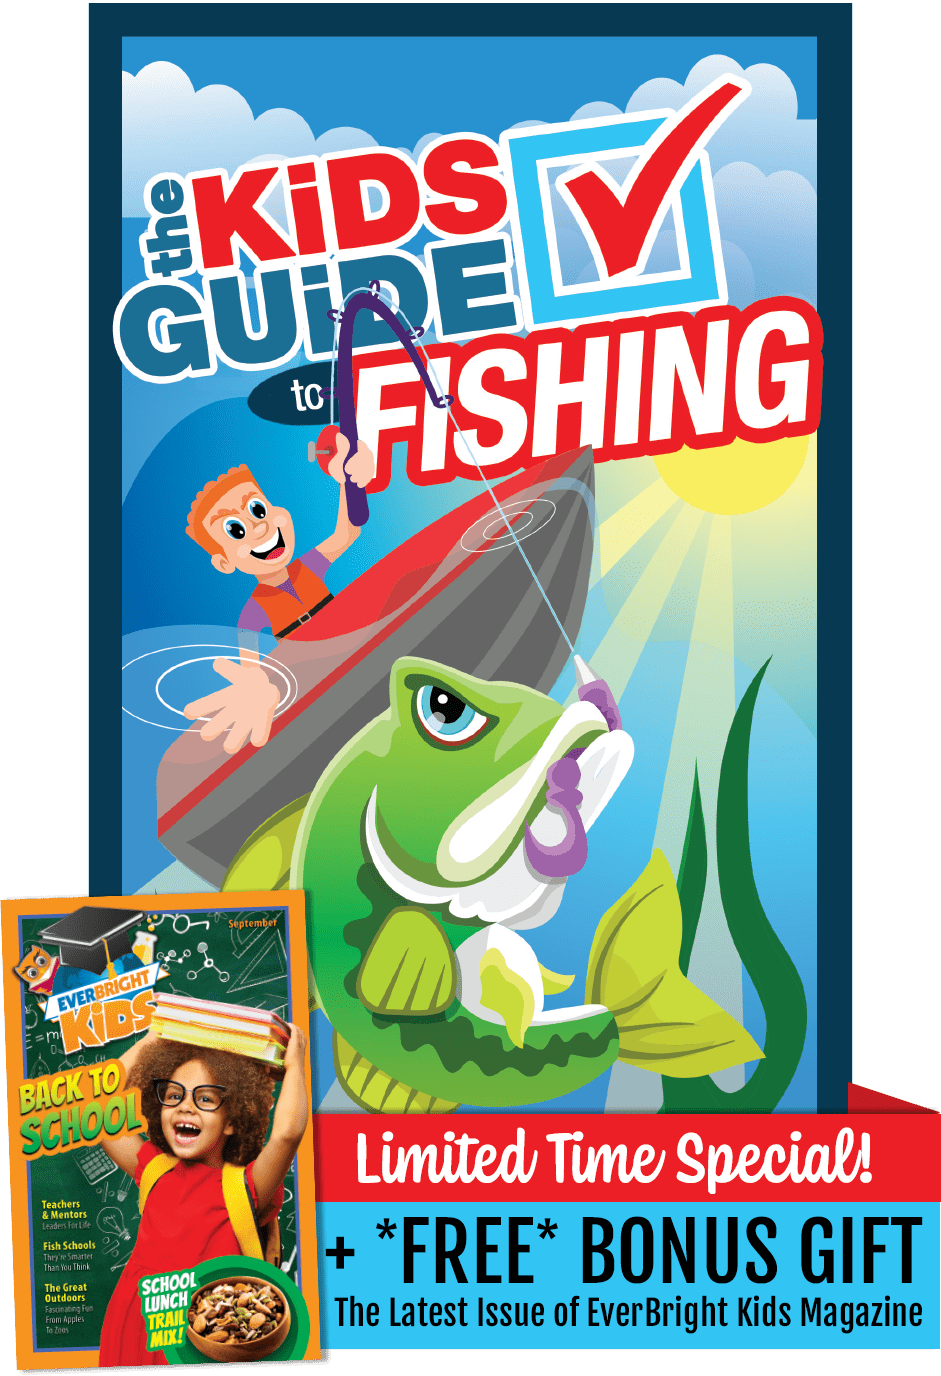 The Kids Guide to Fishing